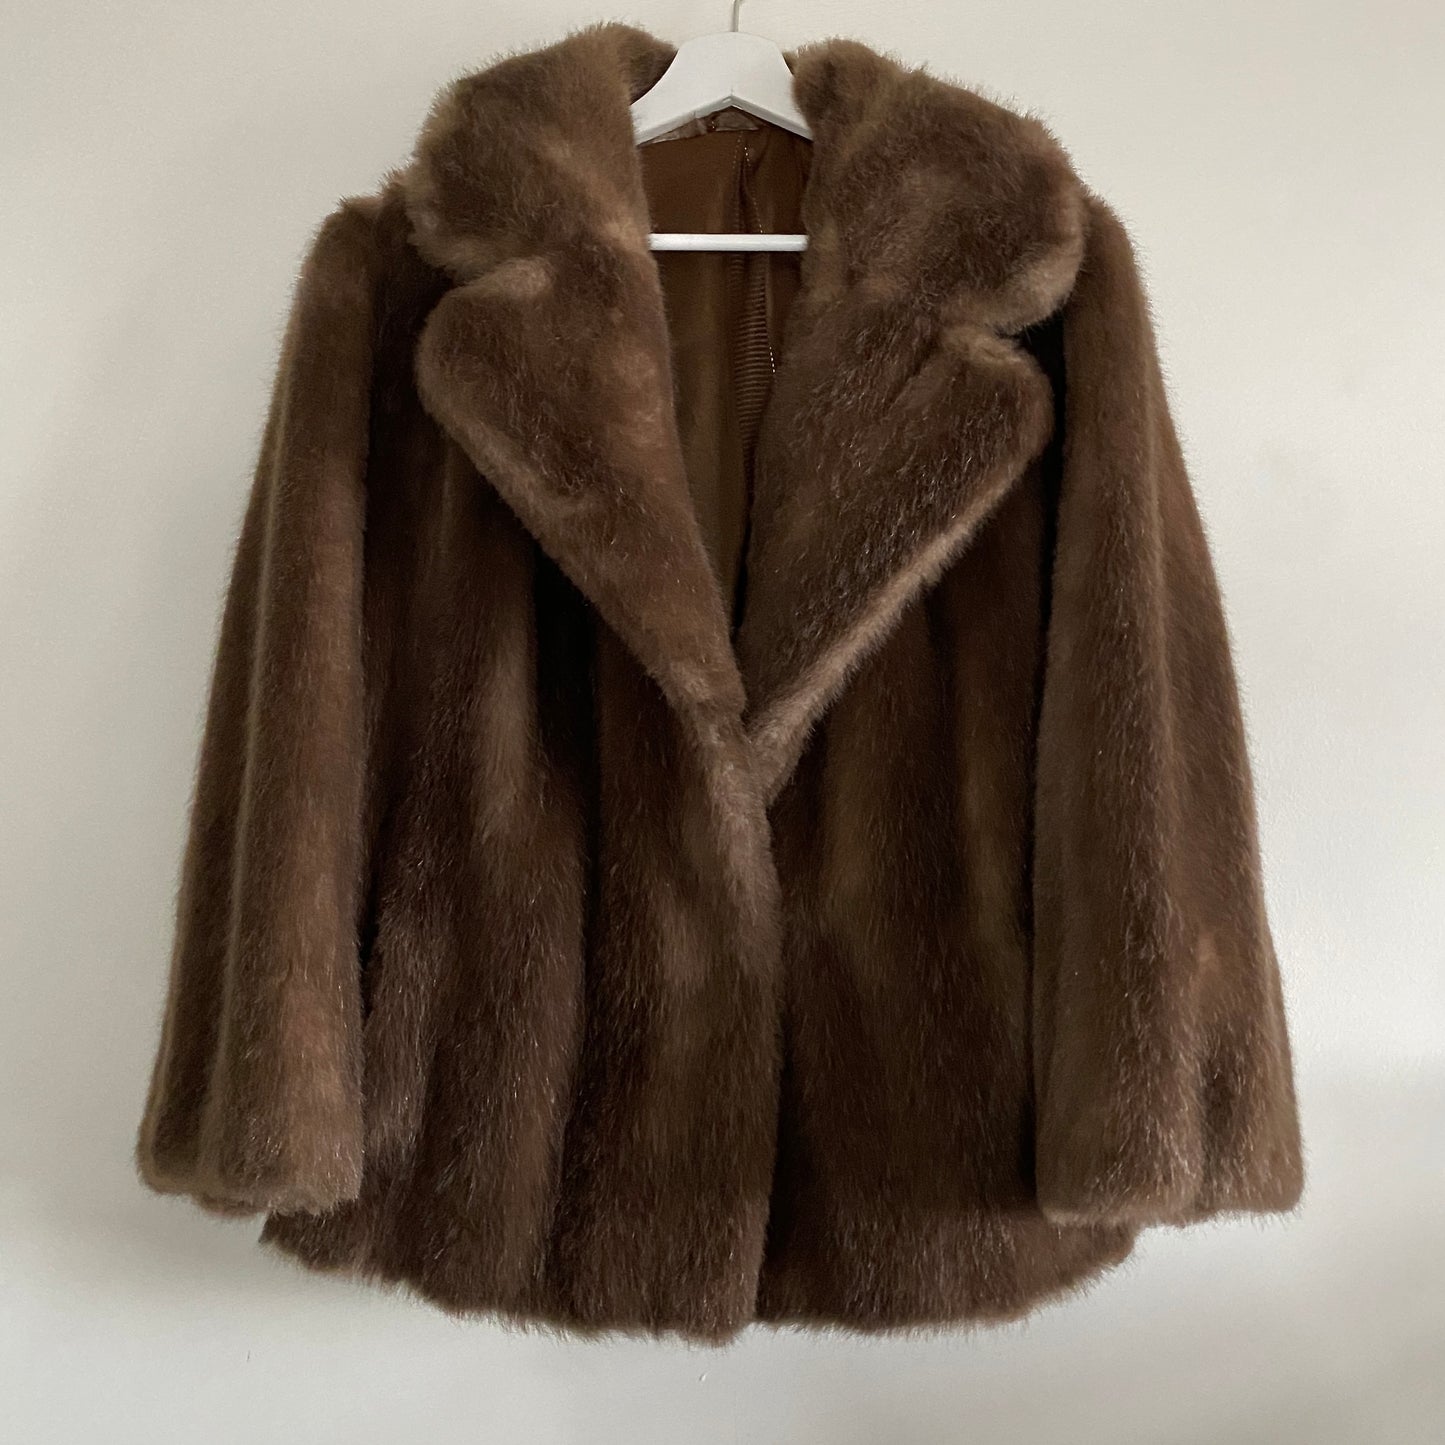 Brown faux fur vintage jacket Rounded revere collar Fastens to front with concealed hook & eye Two front slant pockets Fully lined